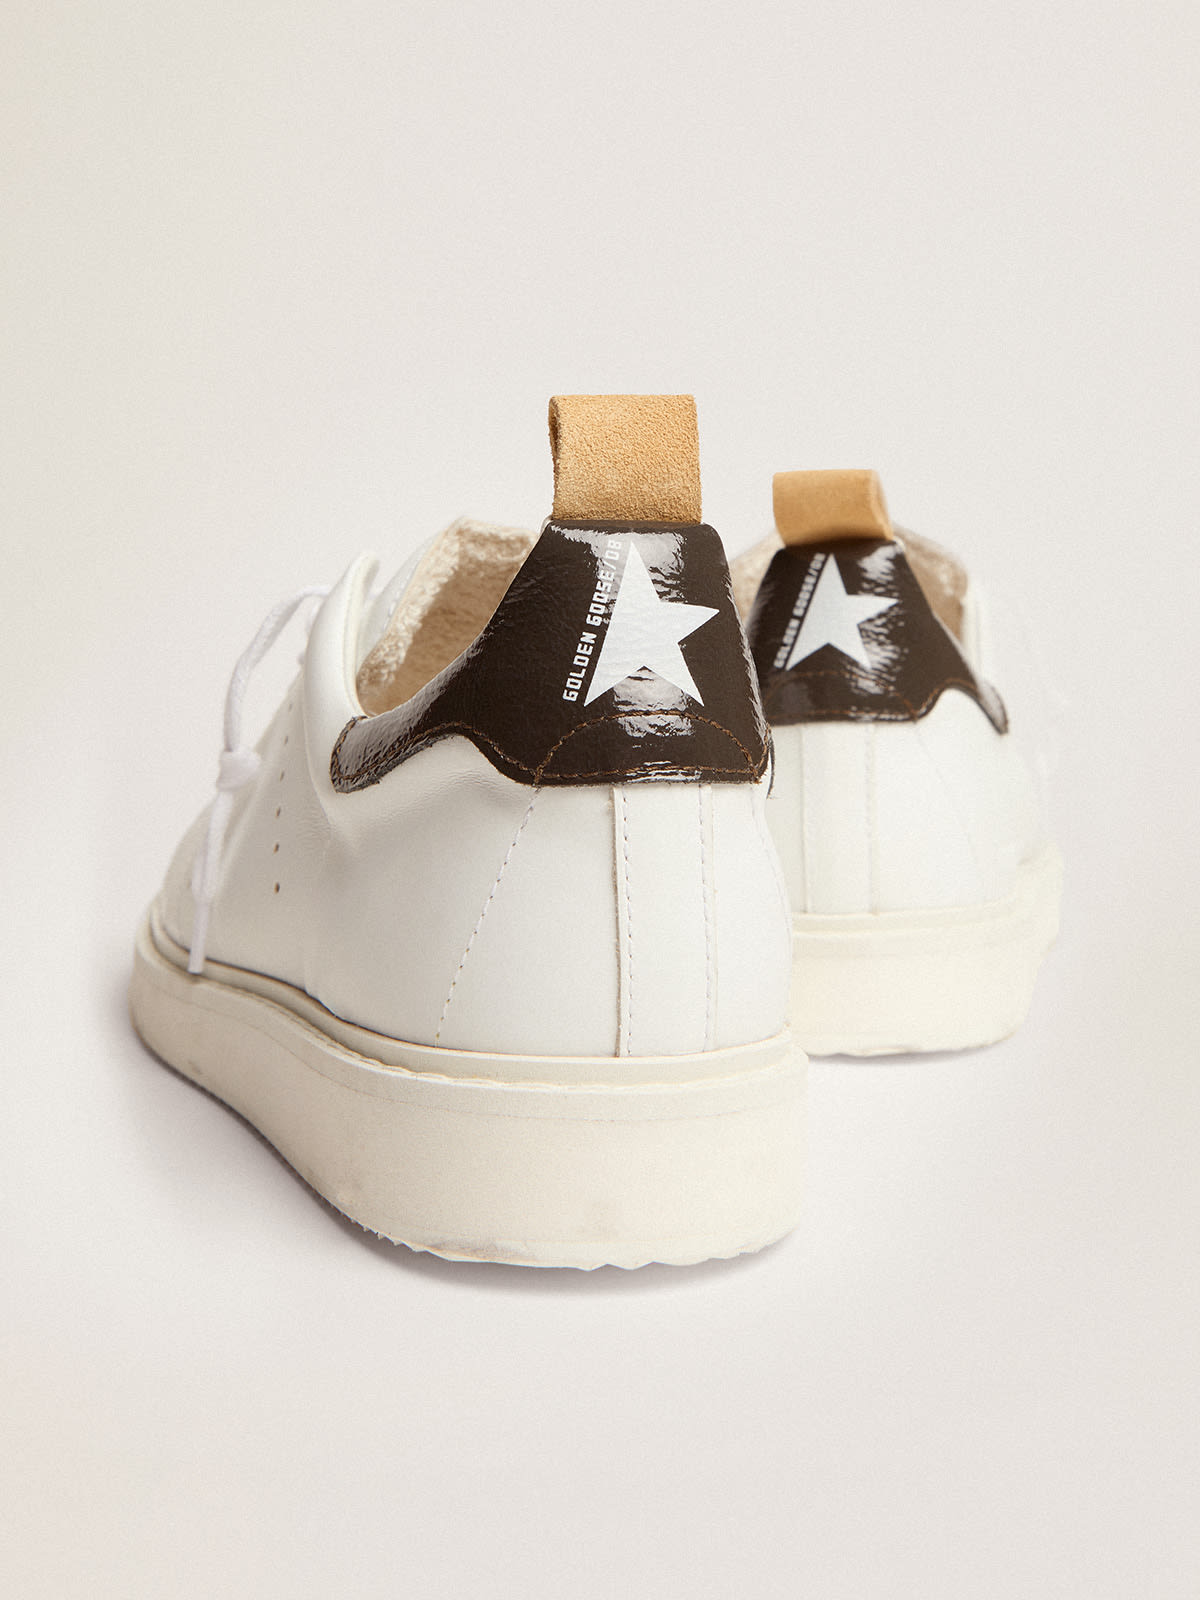 Golden Goose - Men's Starter in white naplack with painted leather heel tab in 